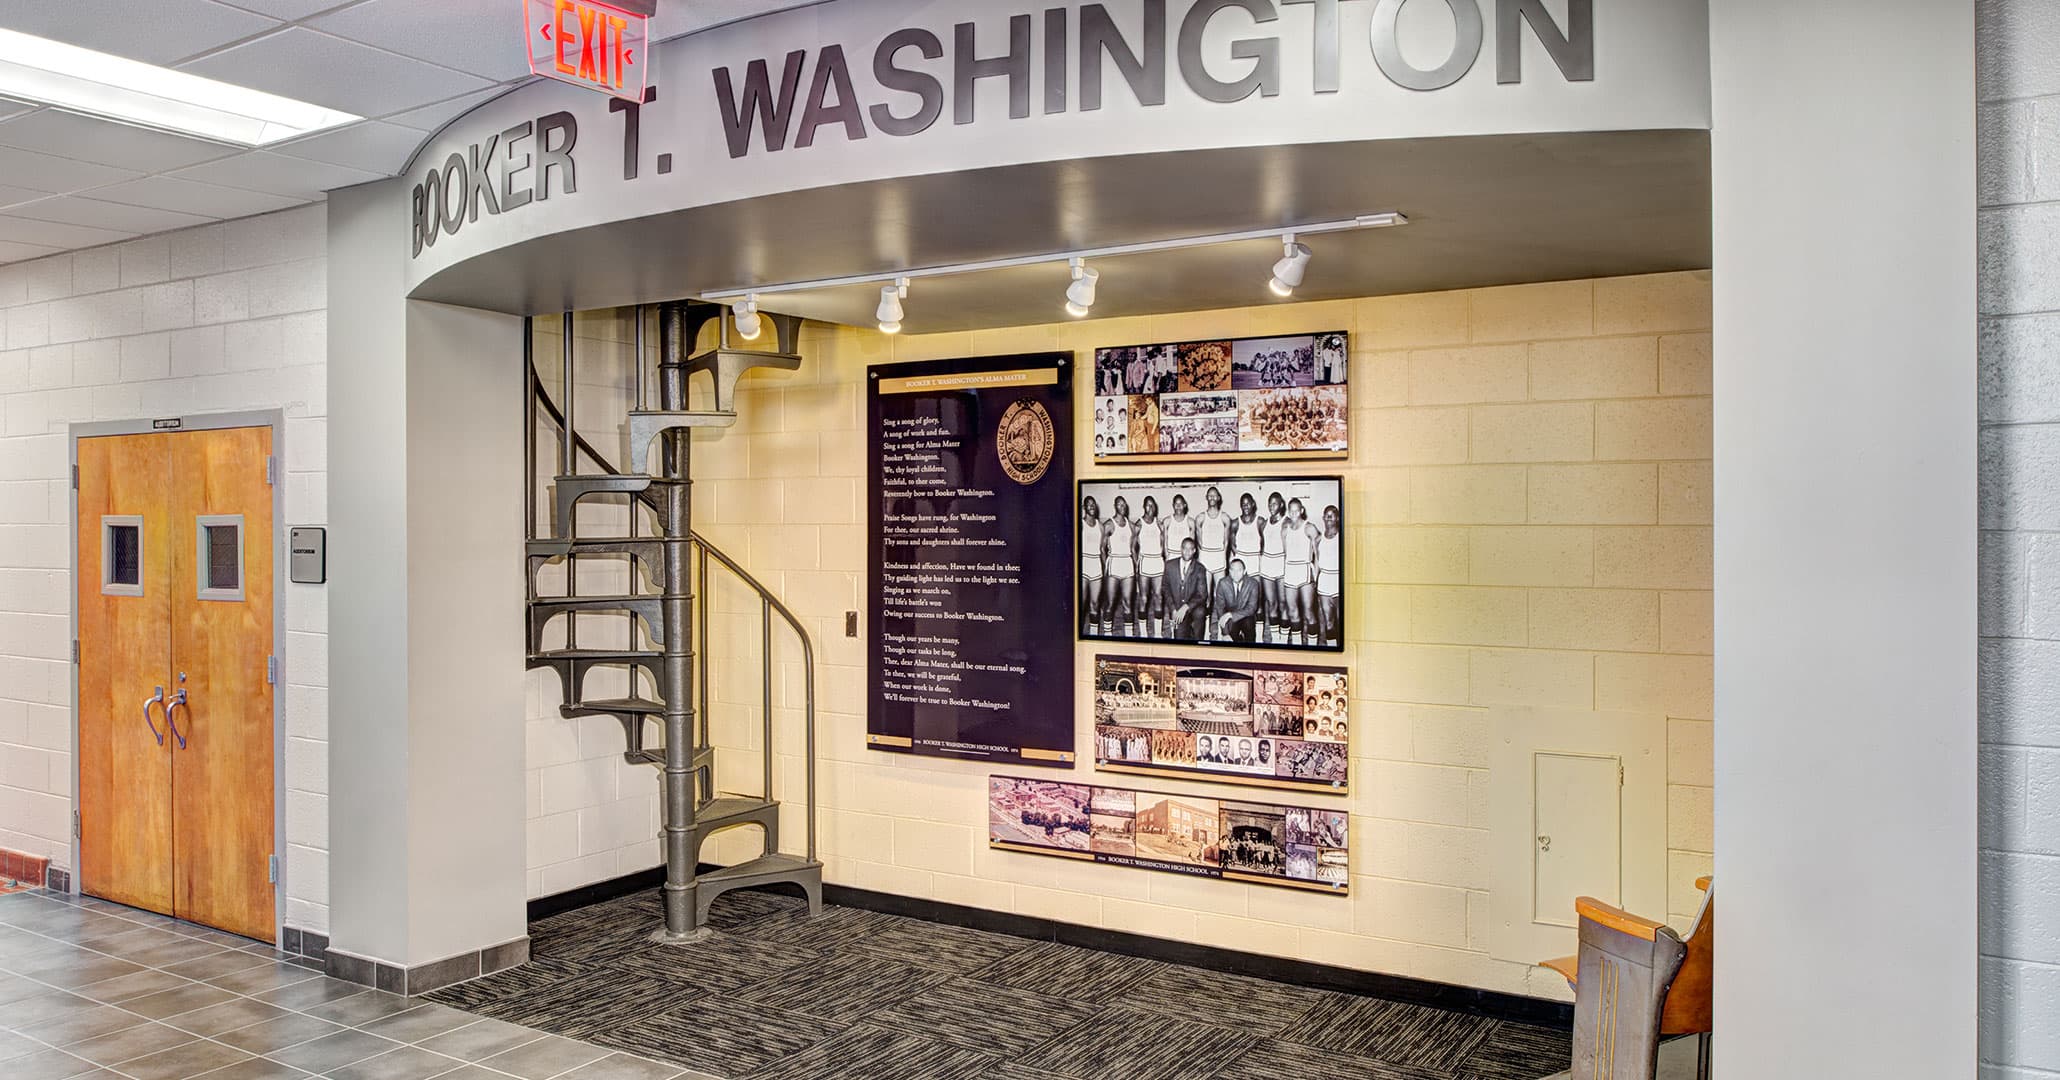 Boudreaux architects worked with black communities to bring Booker T Washington Auditorium back to life.